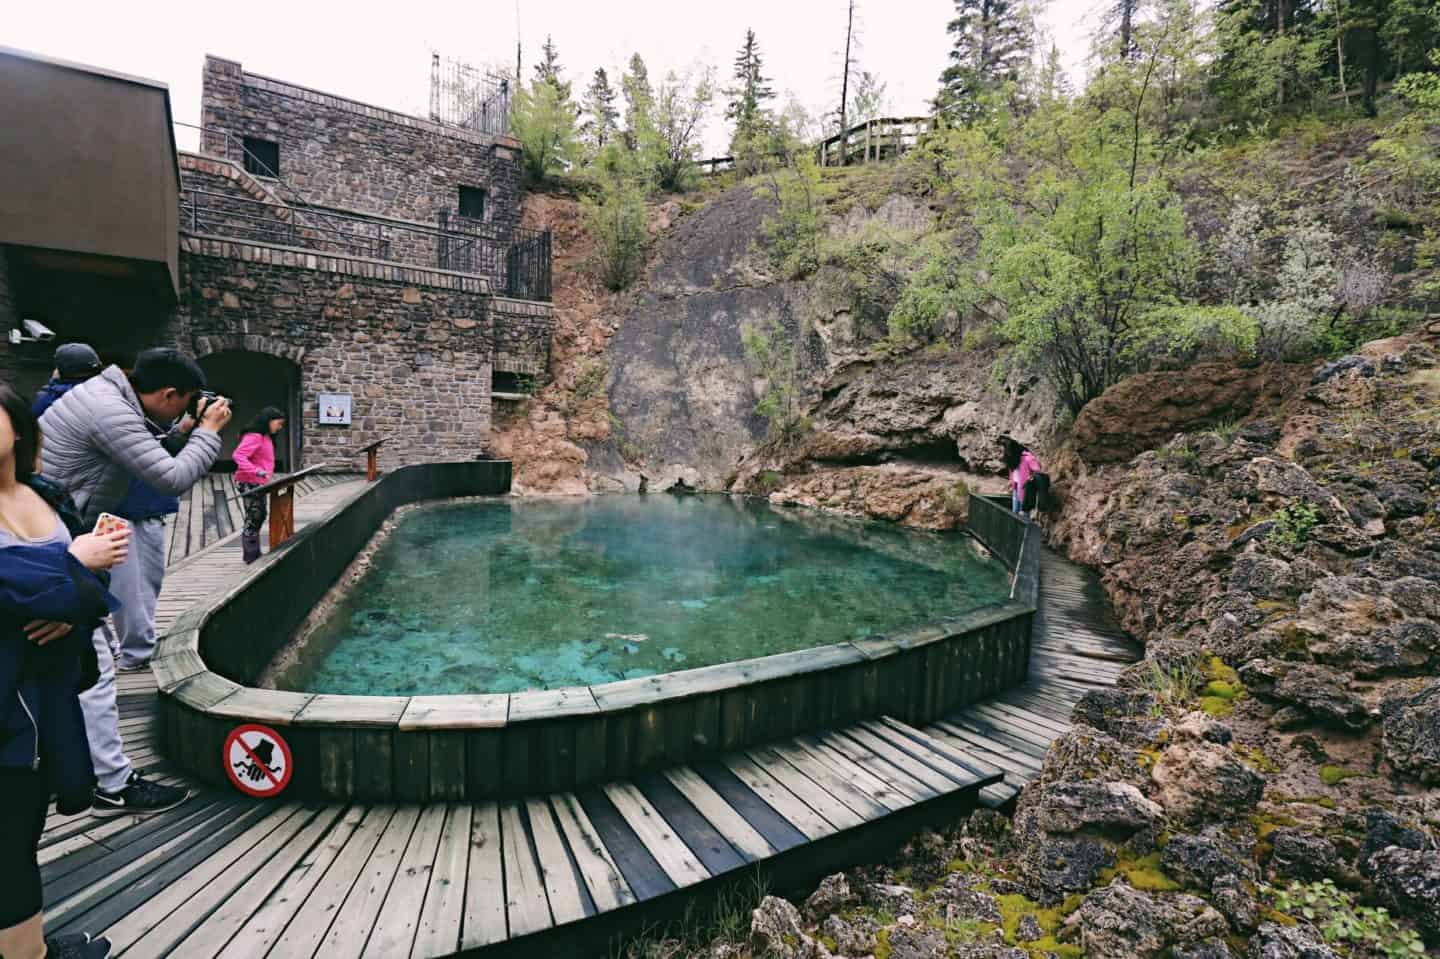 Cave and Basin Historical Site, Banff, Alberta